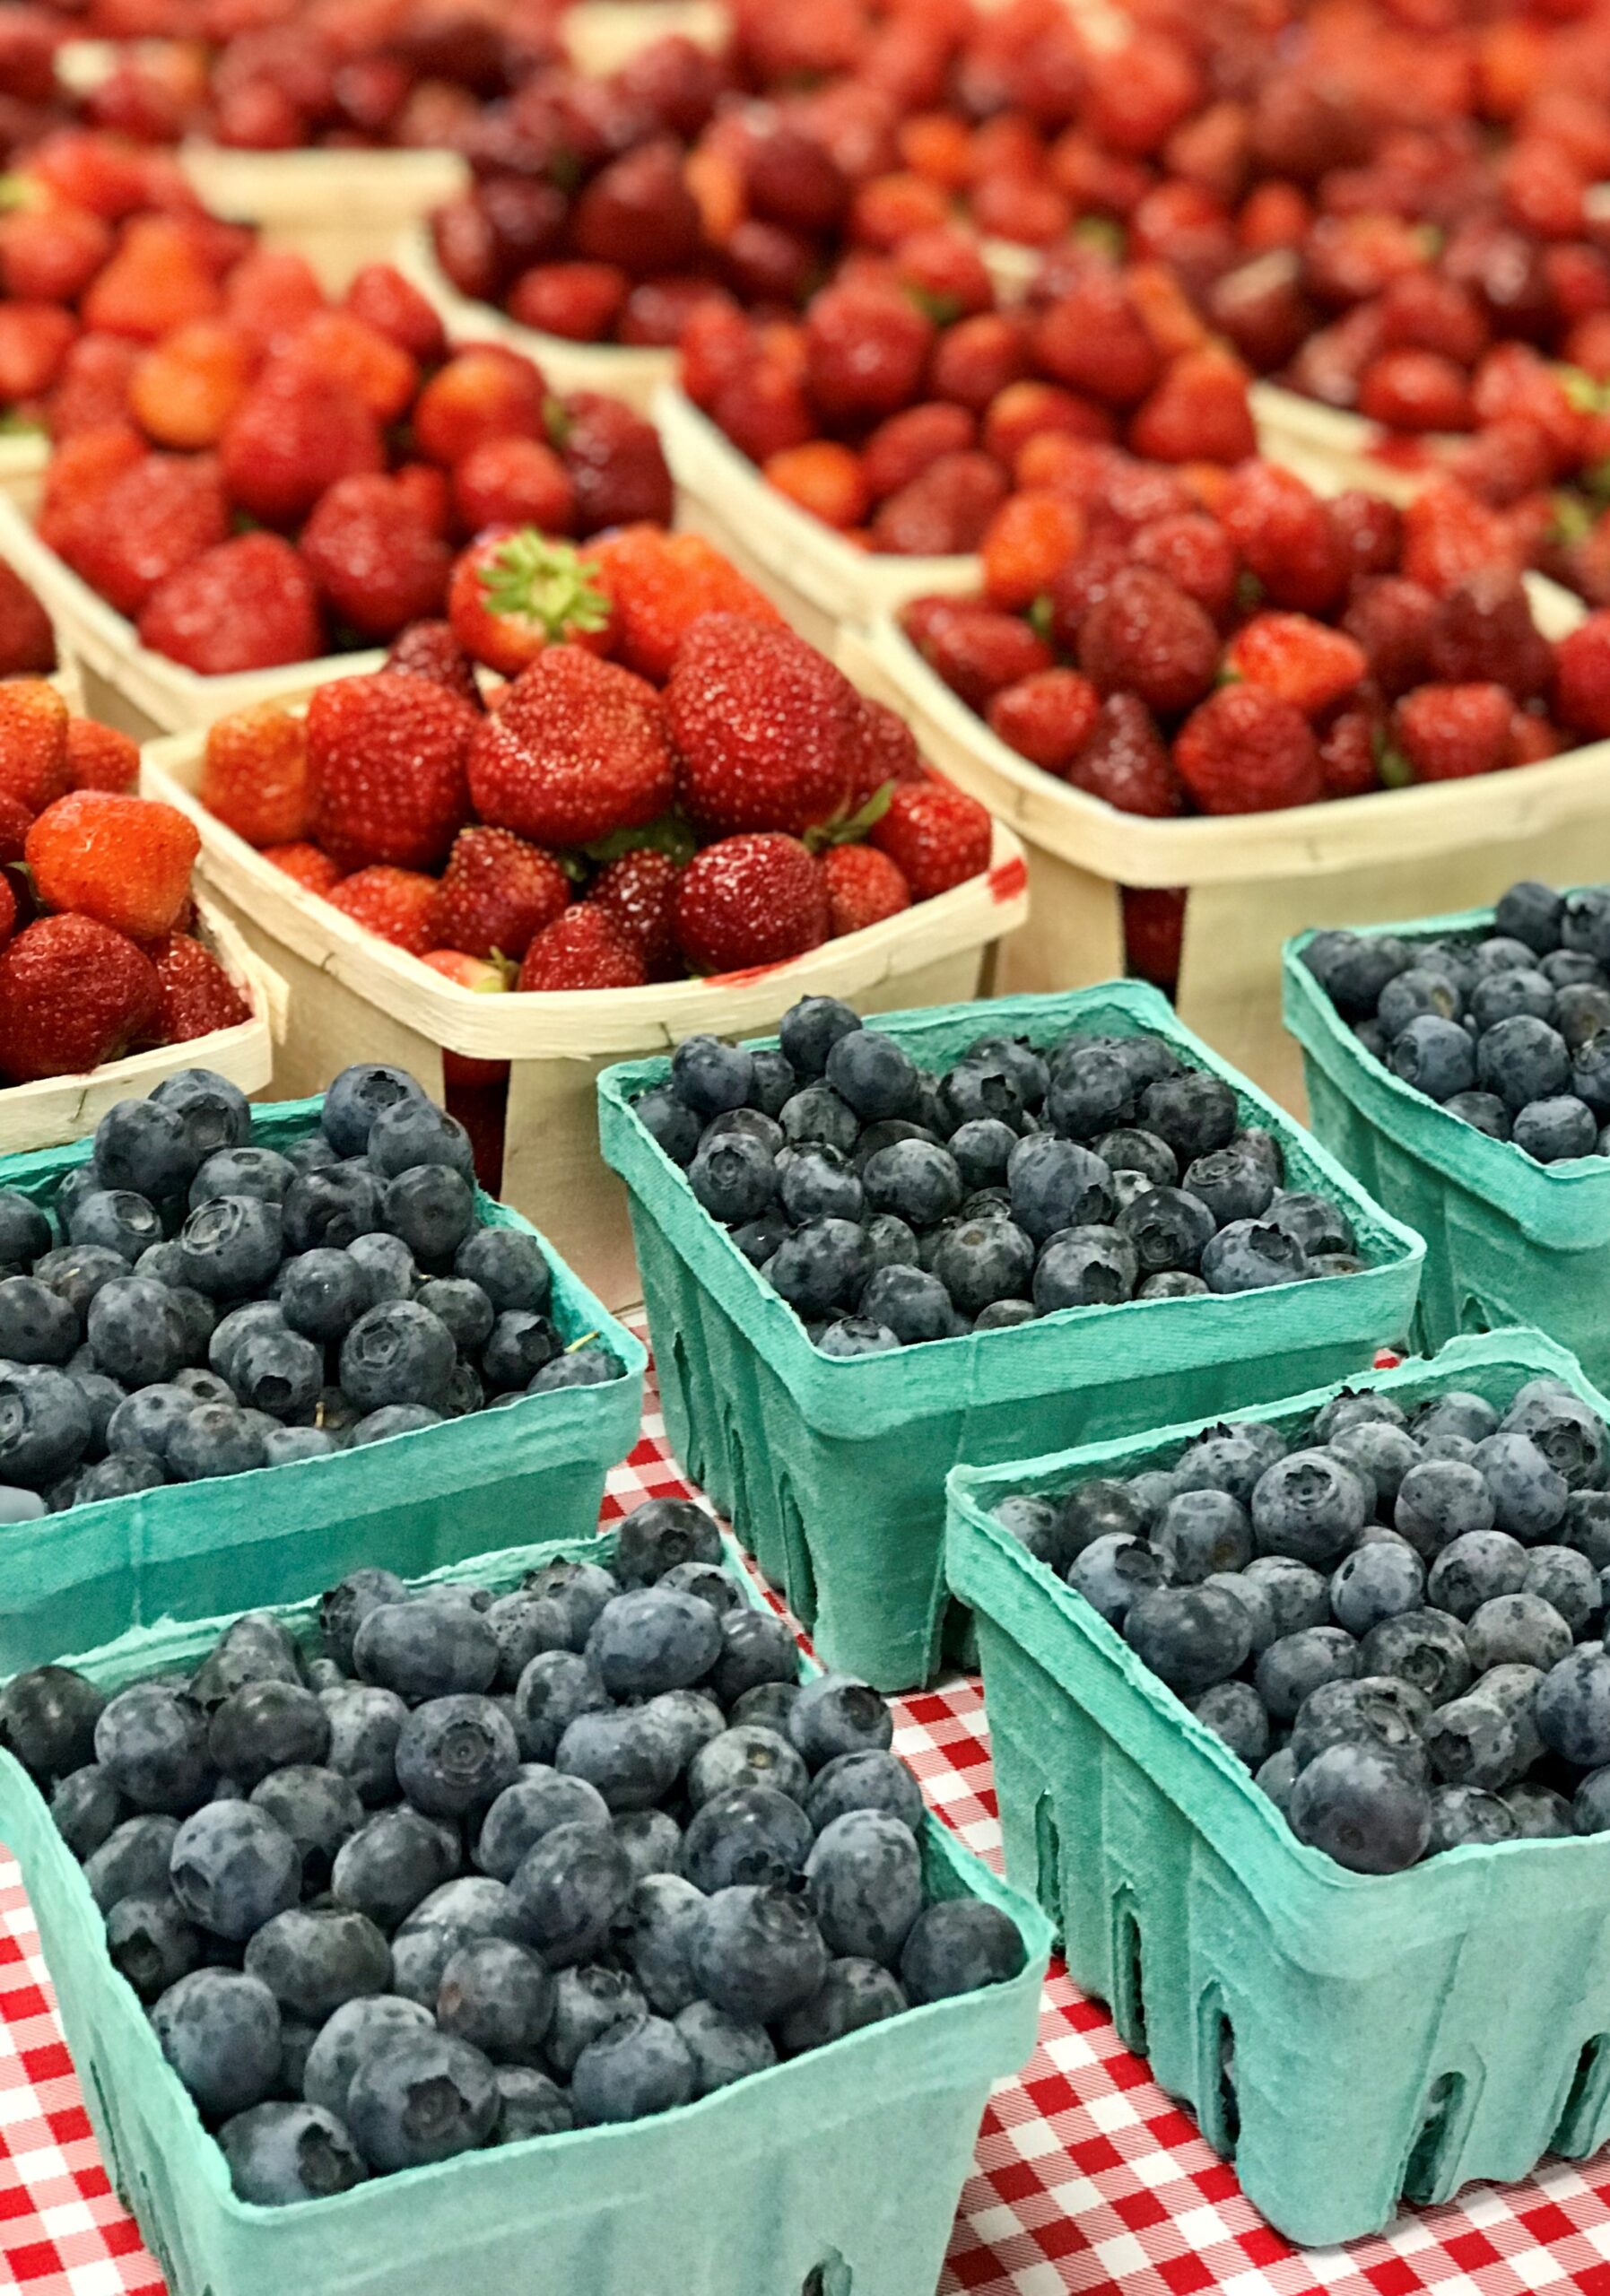 Blueberries and Strawberries grown at Parlee Farms